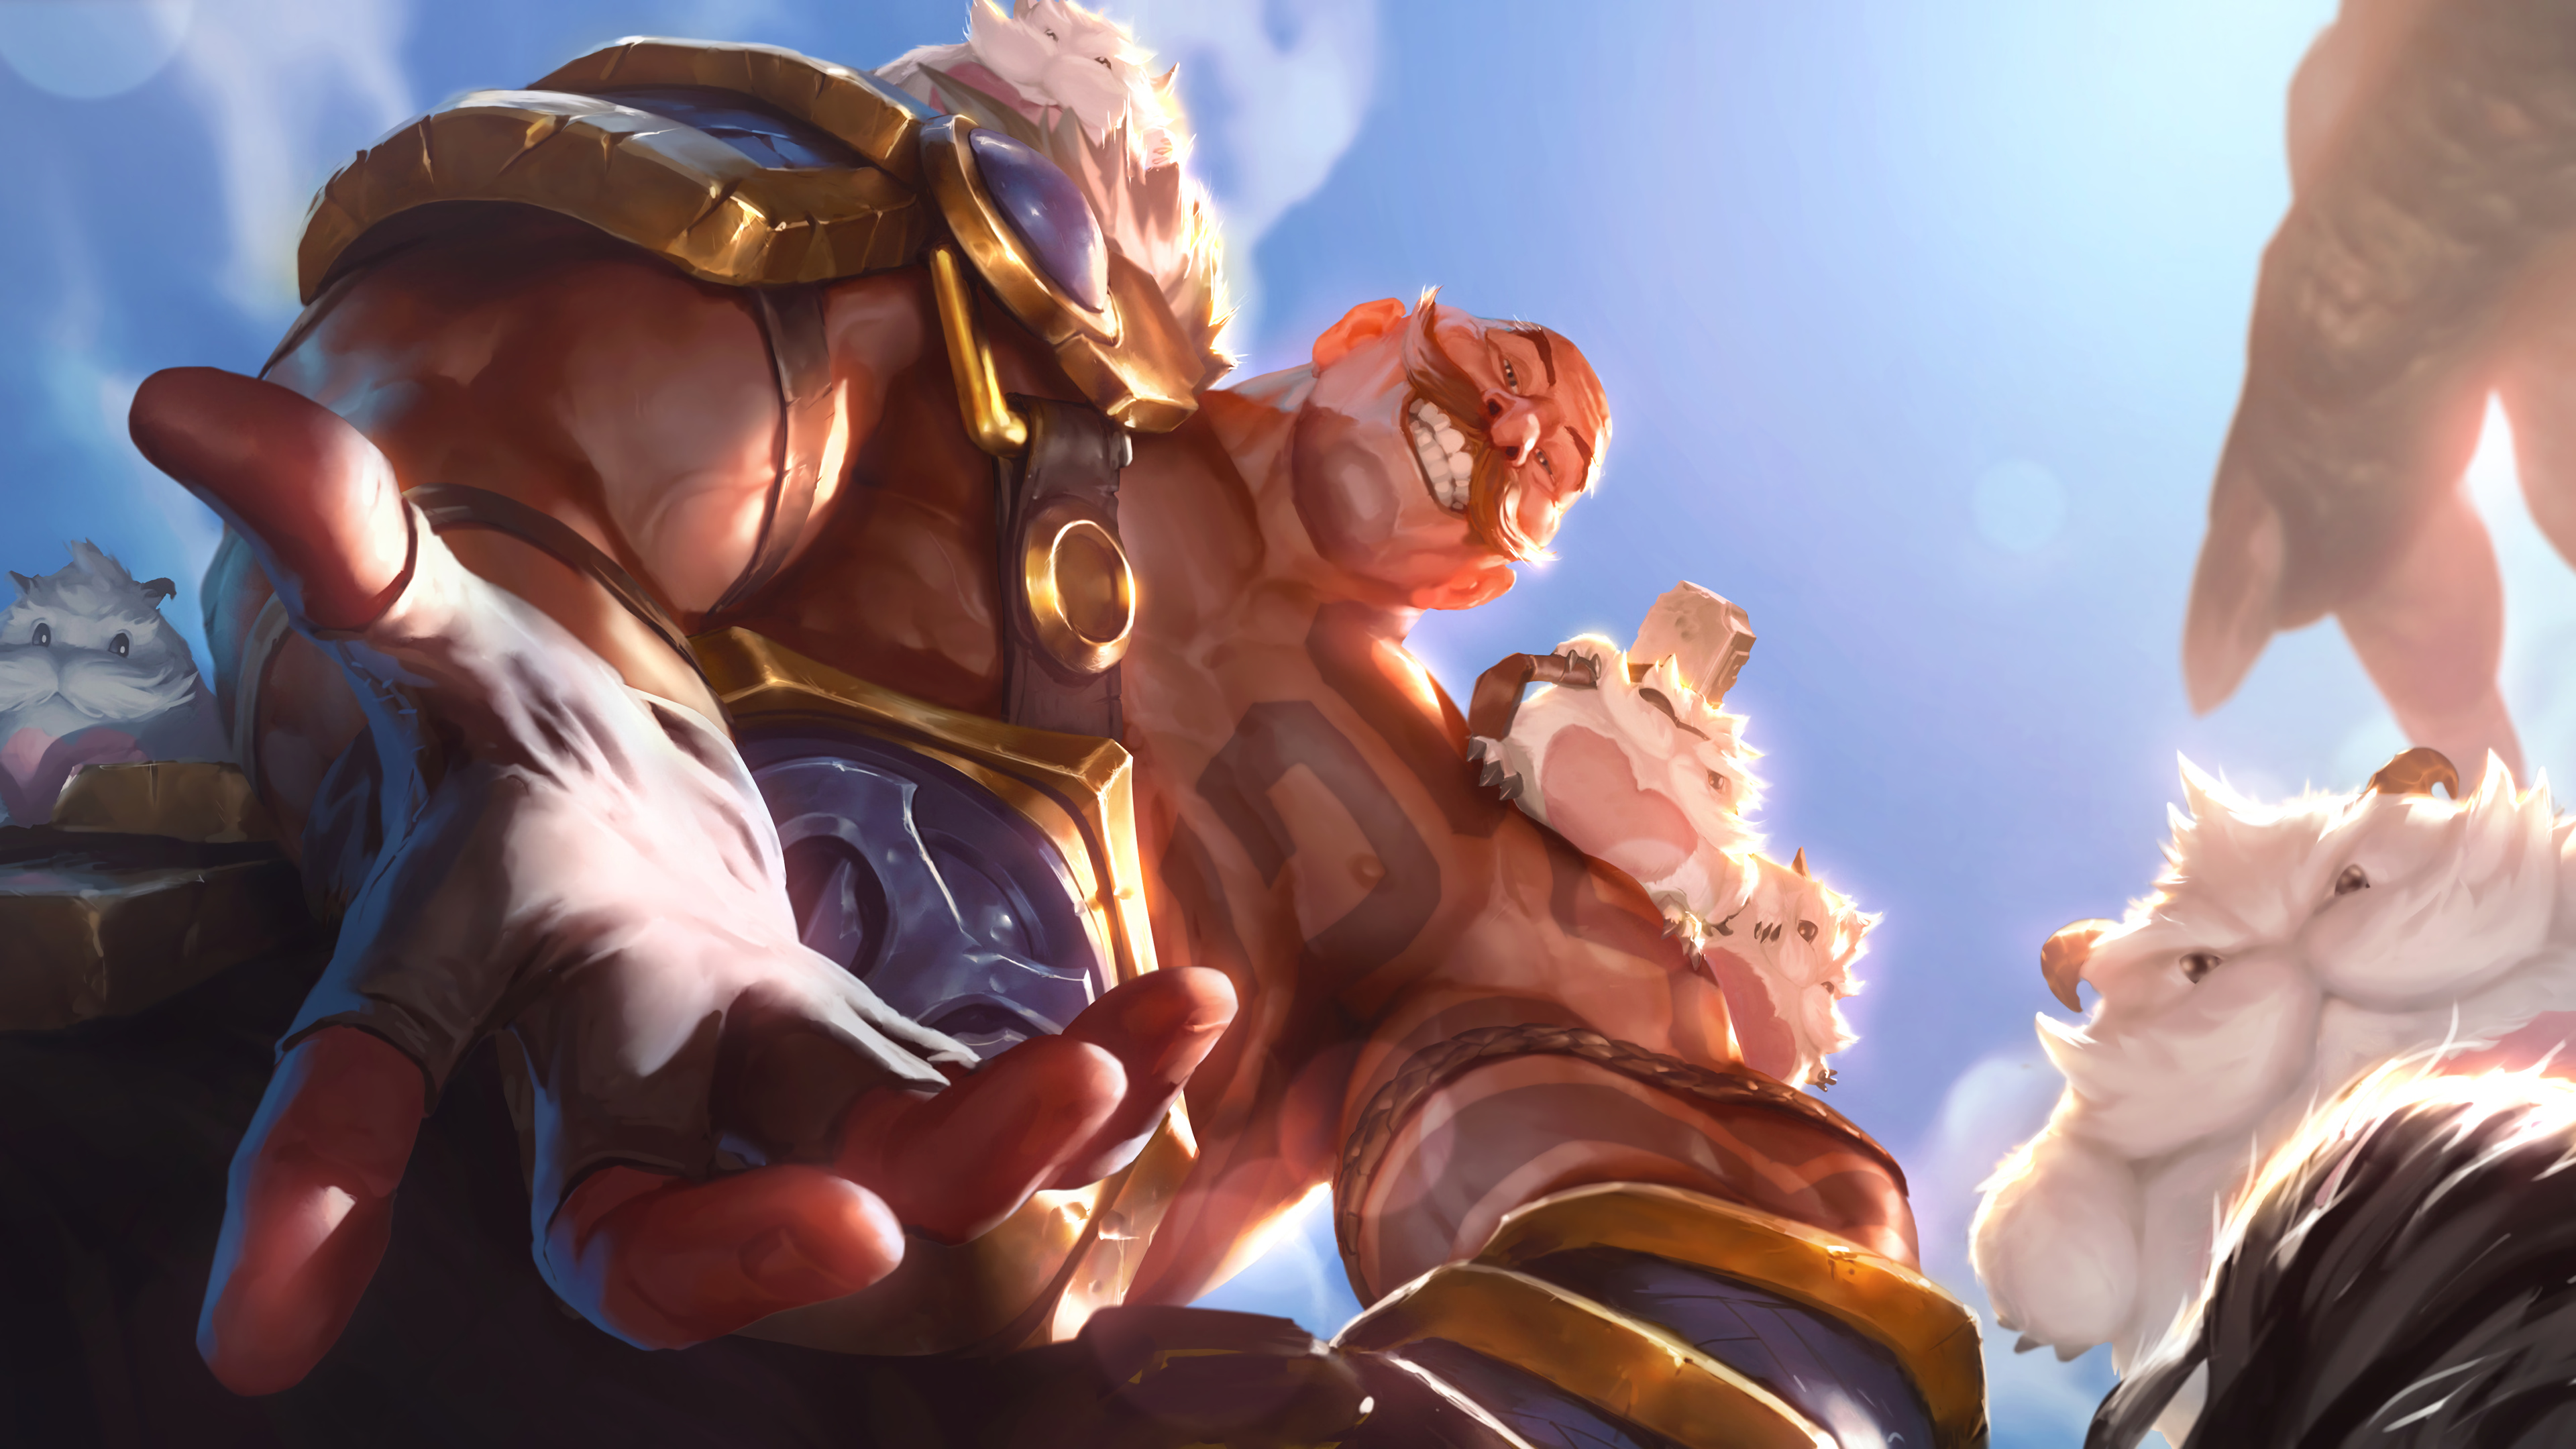 General 3840x2160 Legends of Runeterra League of Legends Braum (League of Legends) Poro (League of Legends) Riot Games video games video game characters